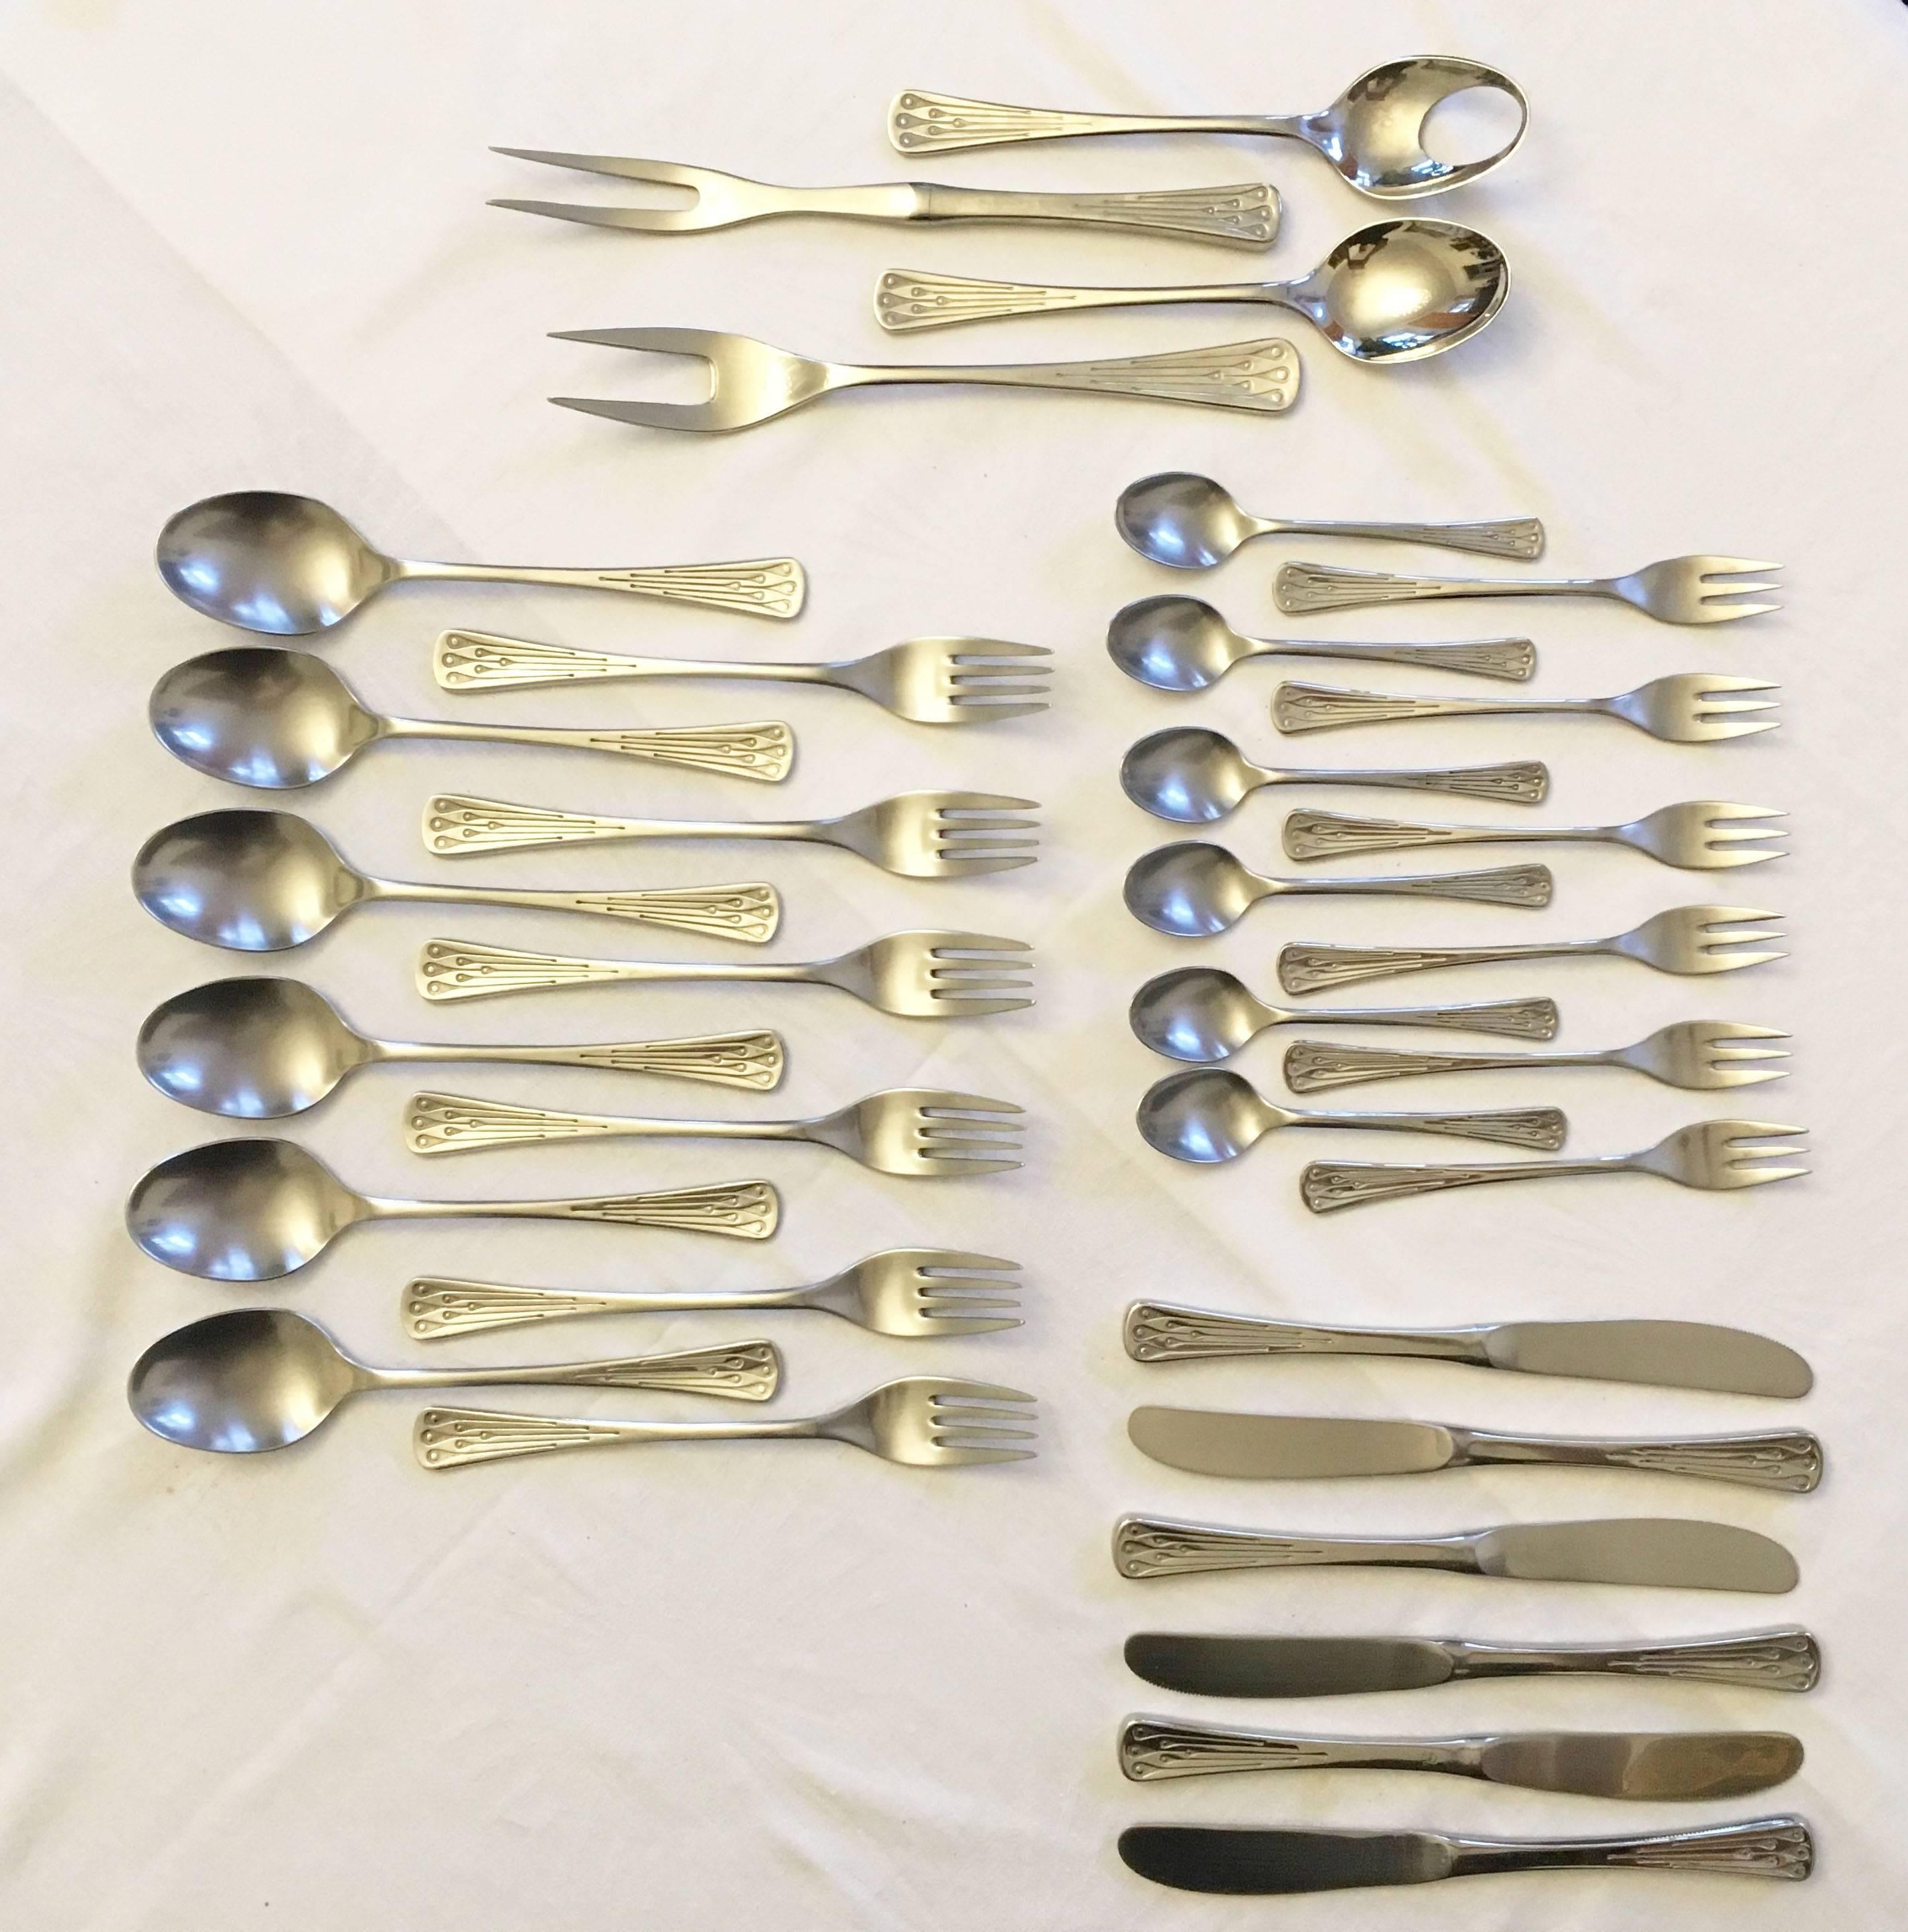 Austrian high quality flatware by Berndorf, former Krupp company, model 9100 Charleston from the 1970s. The cutlery has handle with very interesting geometric decor. Used but in excellent condition, some in near new condition.

34 pieces are in this